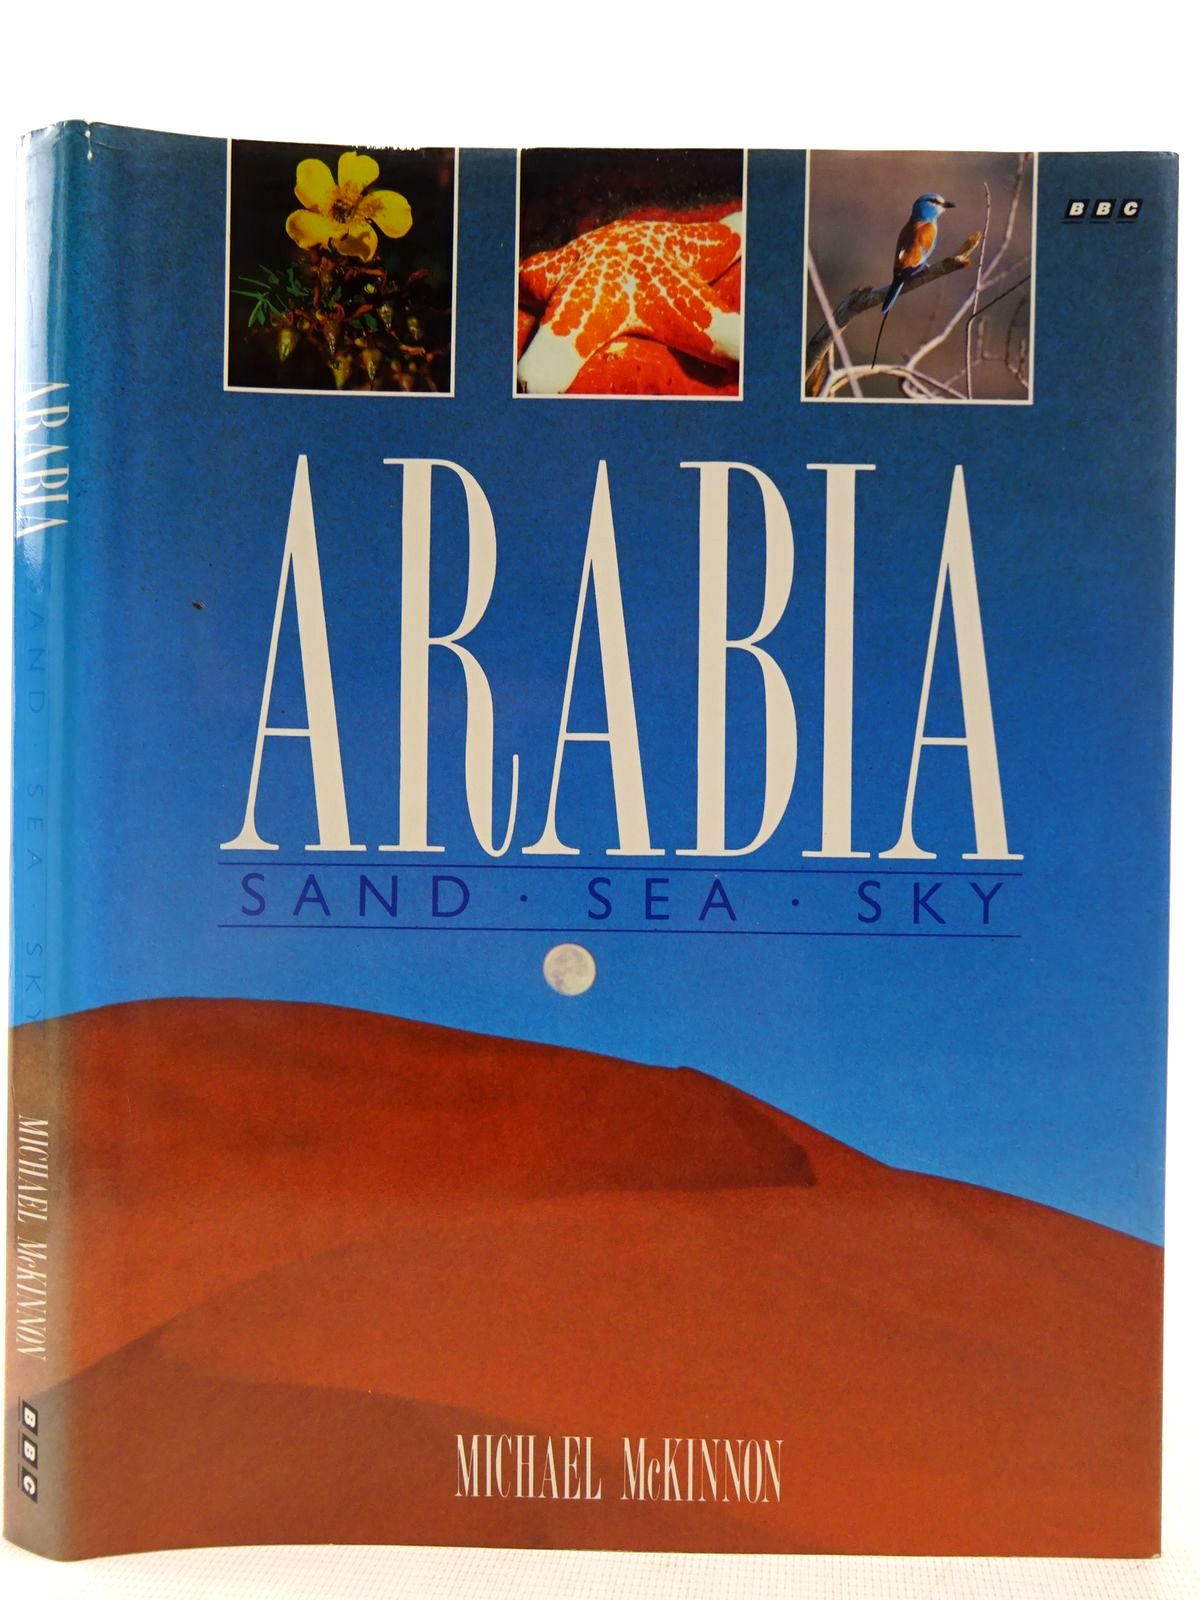 Photo of ARABIA SAND SEA SKY written by McKinnon, Michael published by BBC Books (STOCK CODE: 2128285)  for sale by Stella & Rose's Books